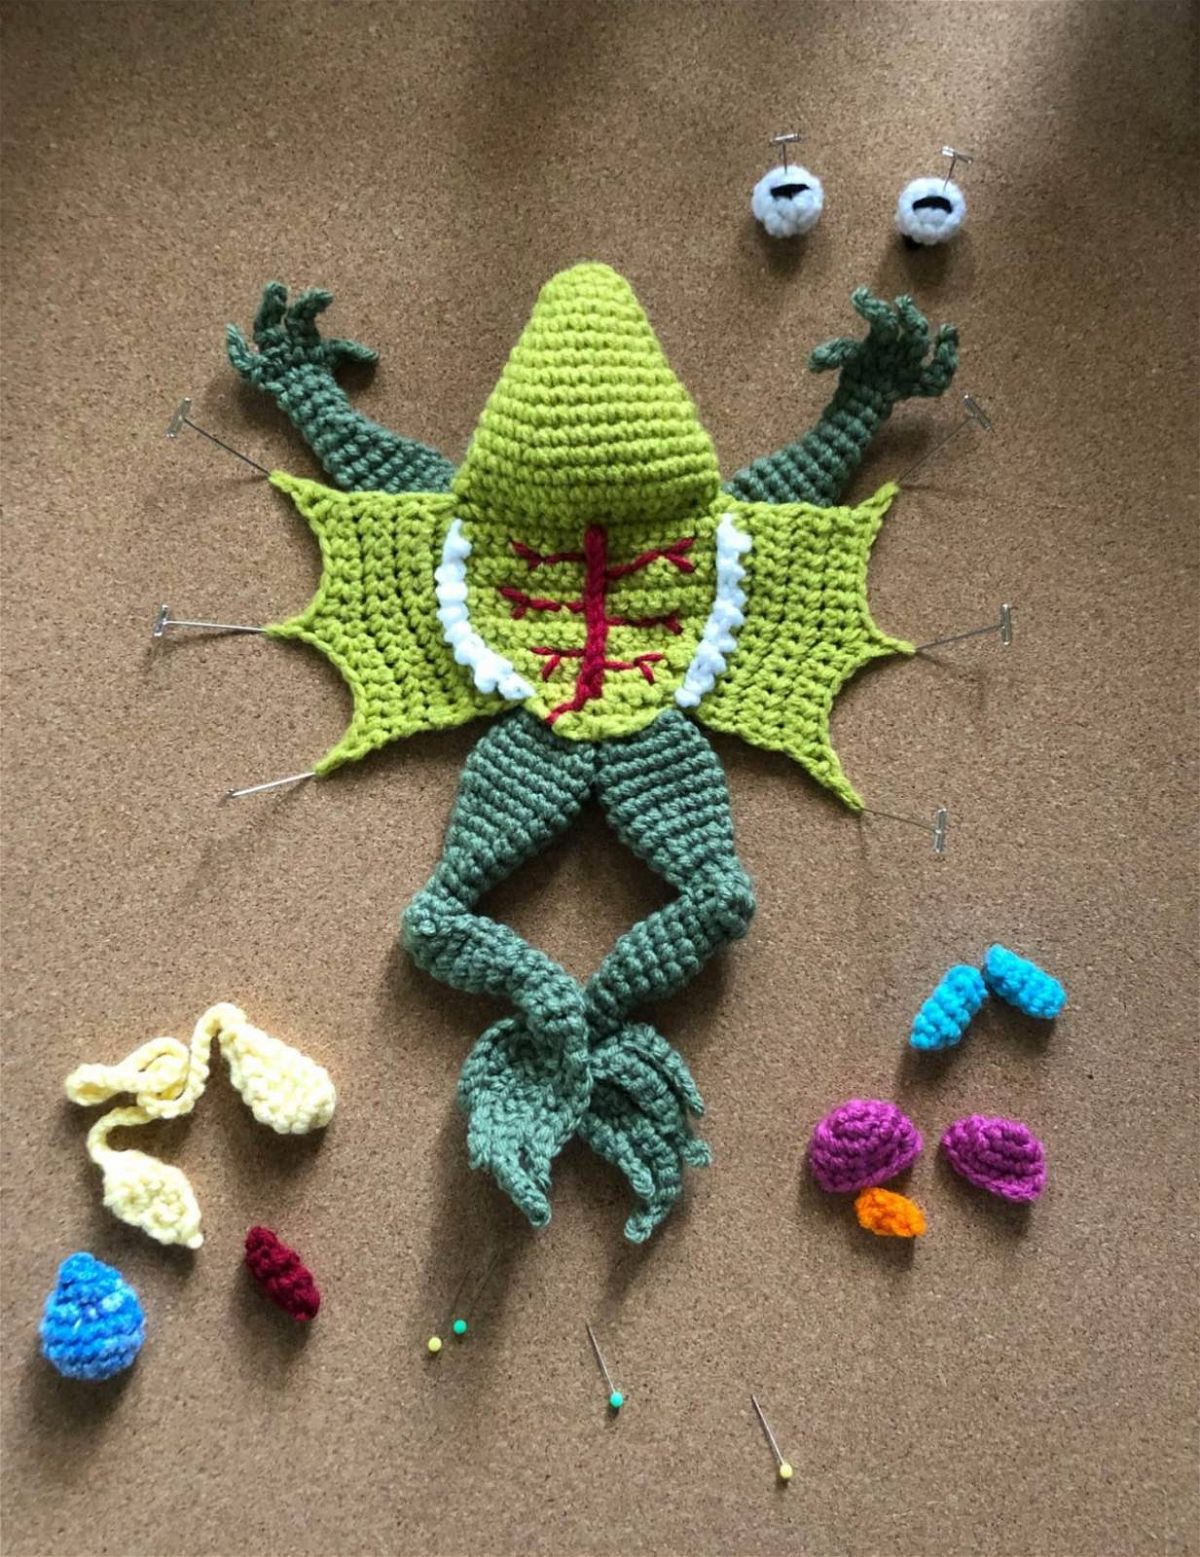 Crochet Frog Dissection Amigurumi Pattern Review by April Petersen for Cottontail and Whiskers